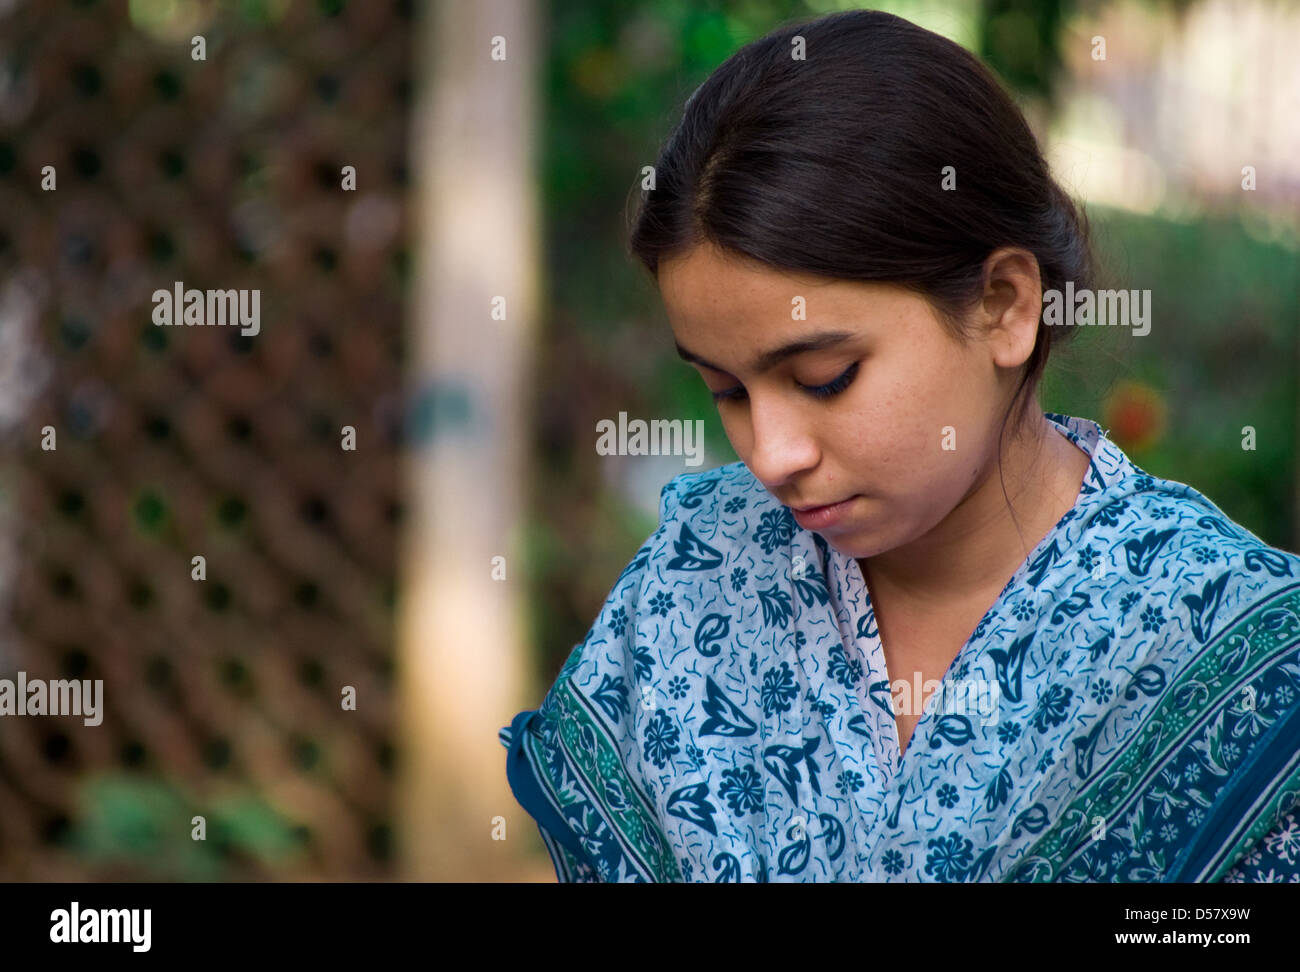 Young Girl Siting Alone Stock Photo